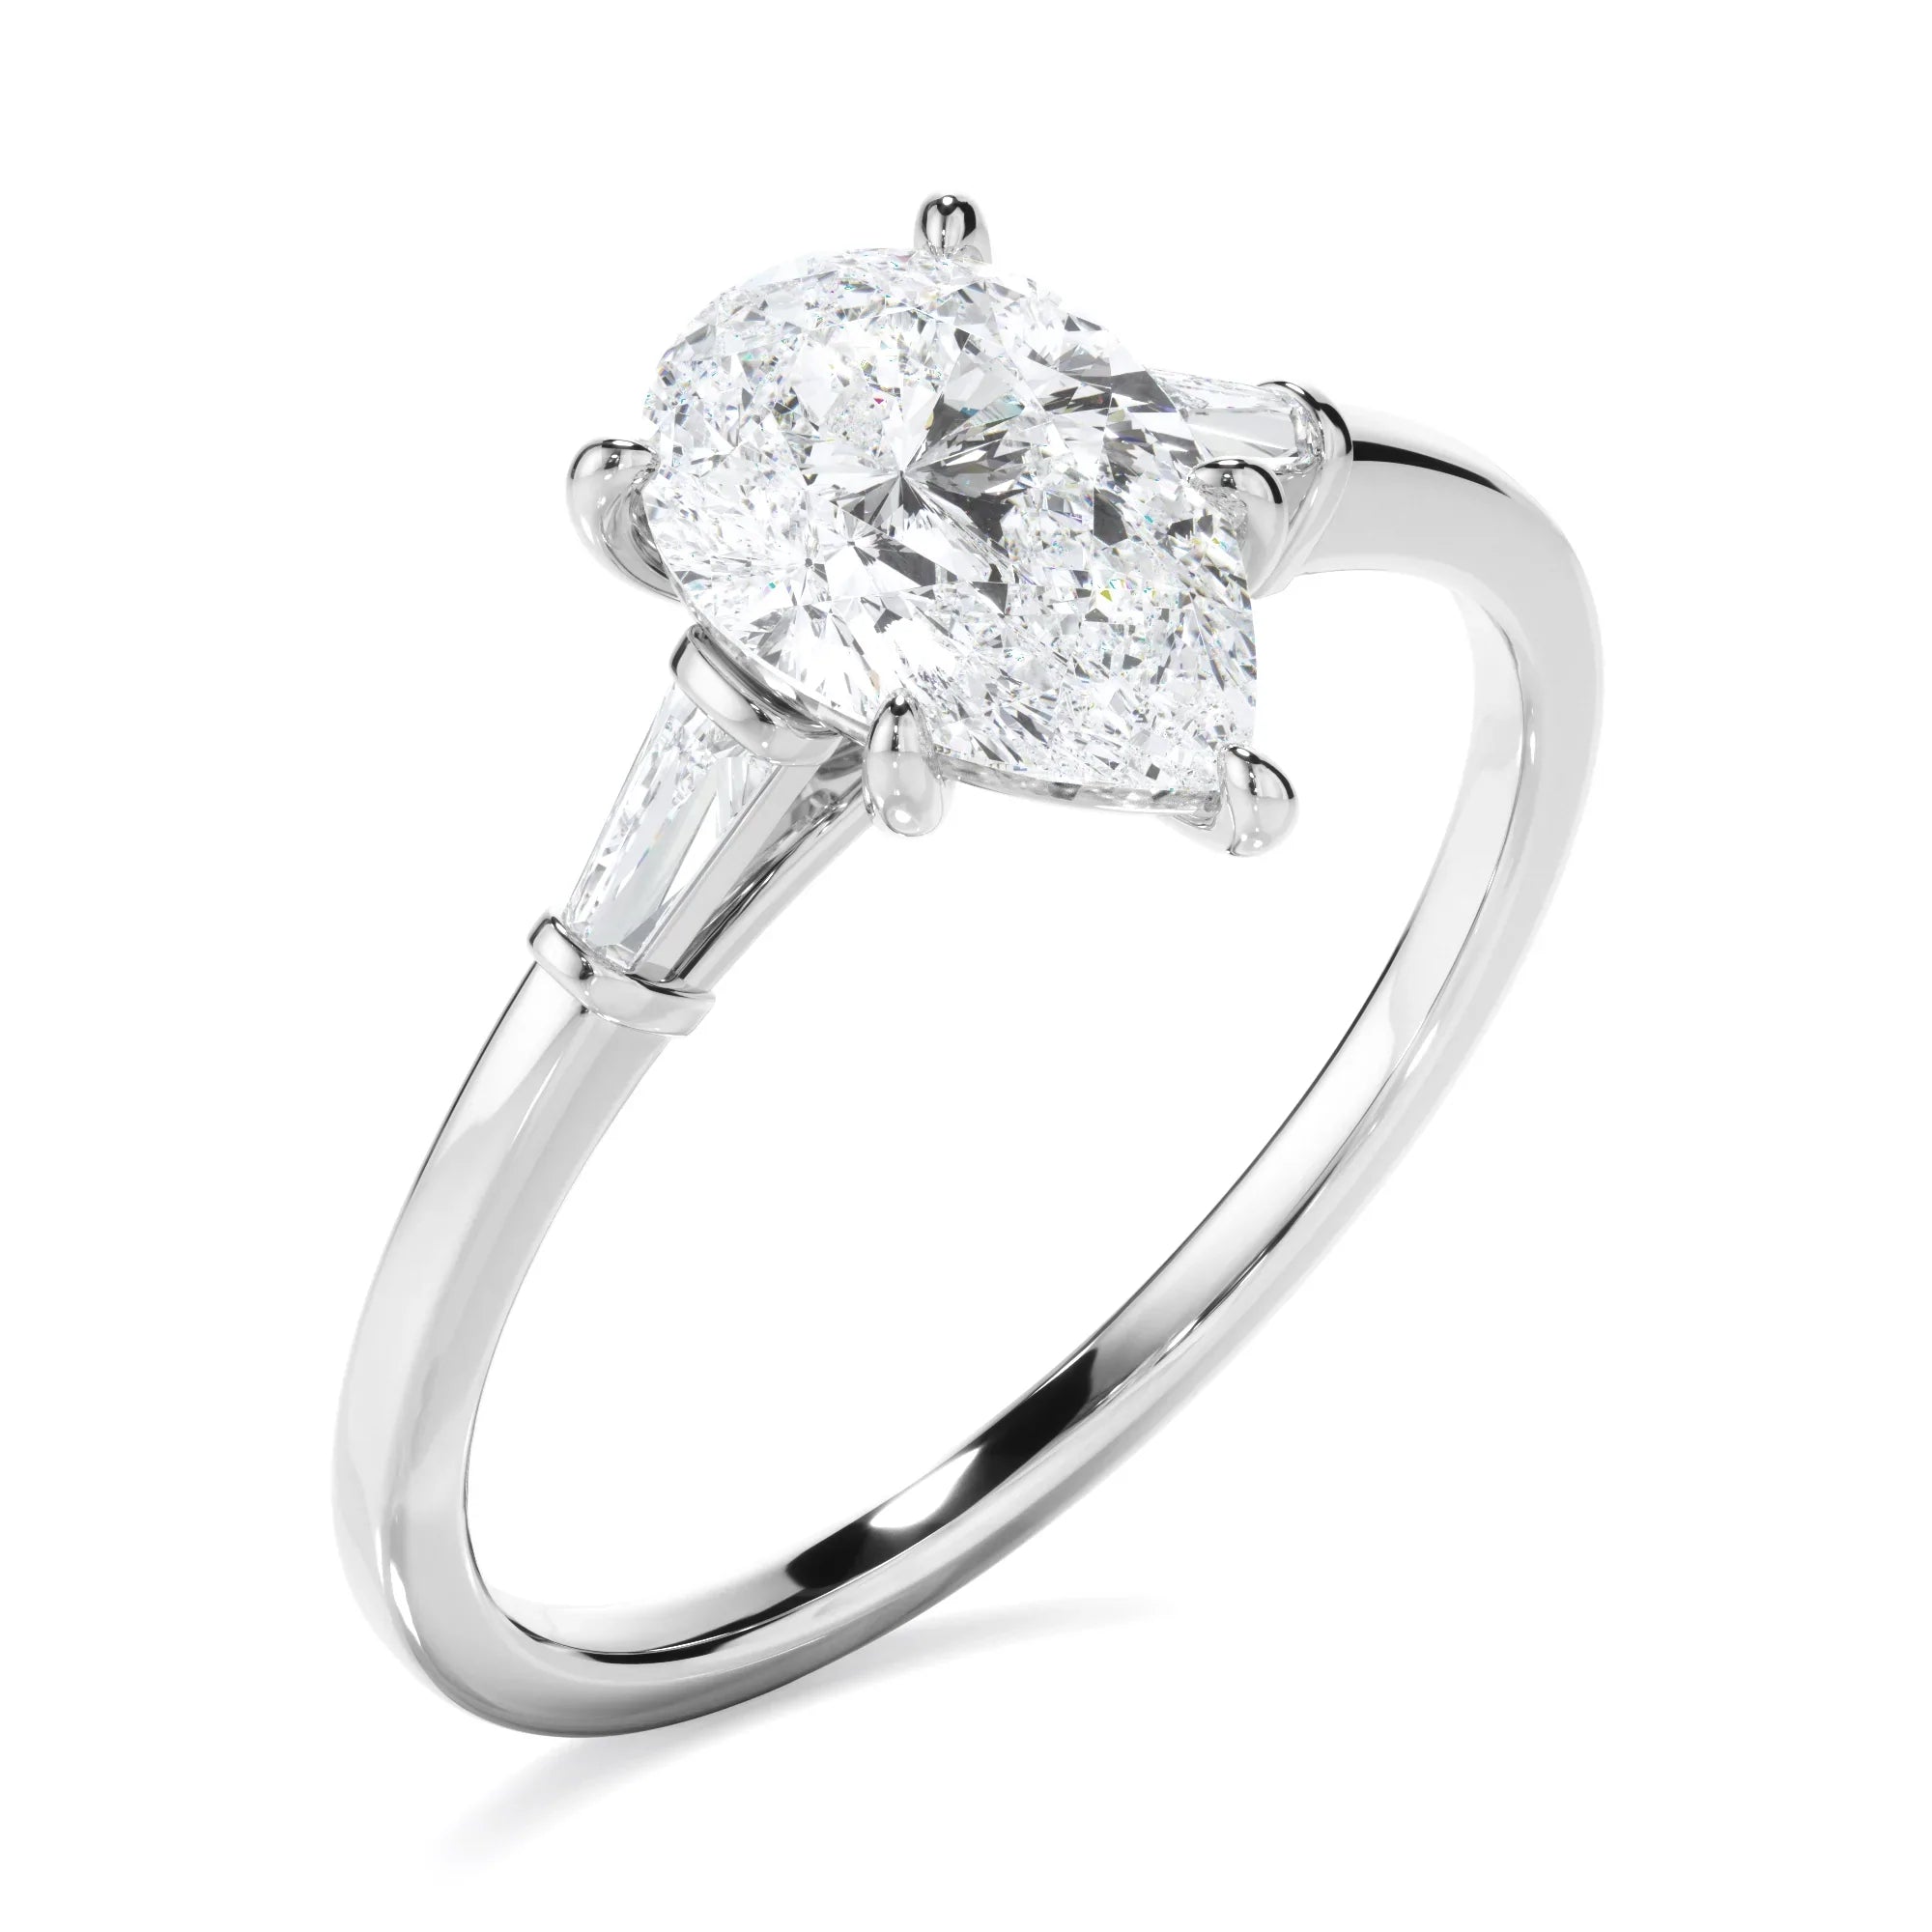 Pear Cut Diamond Engagement Ring With Baguette Sides